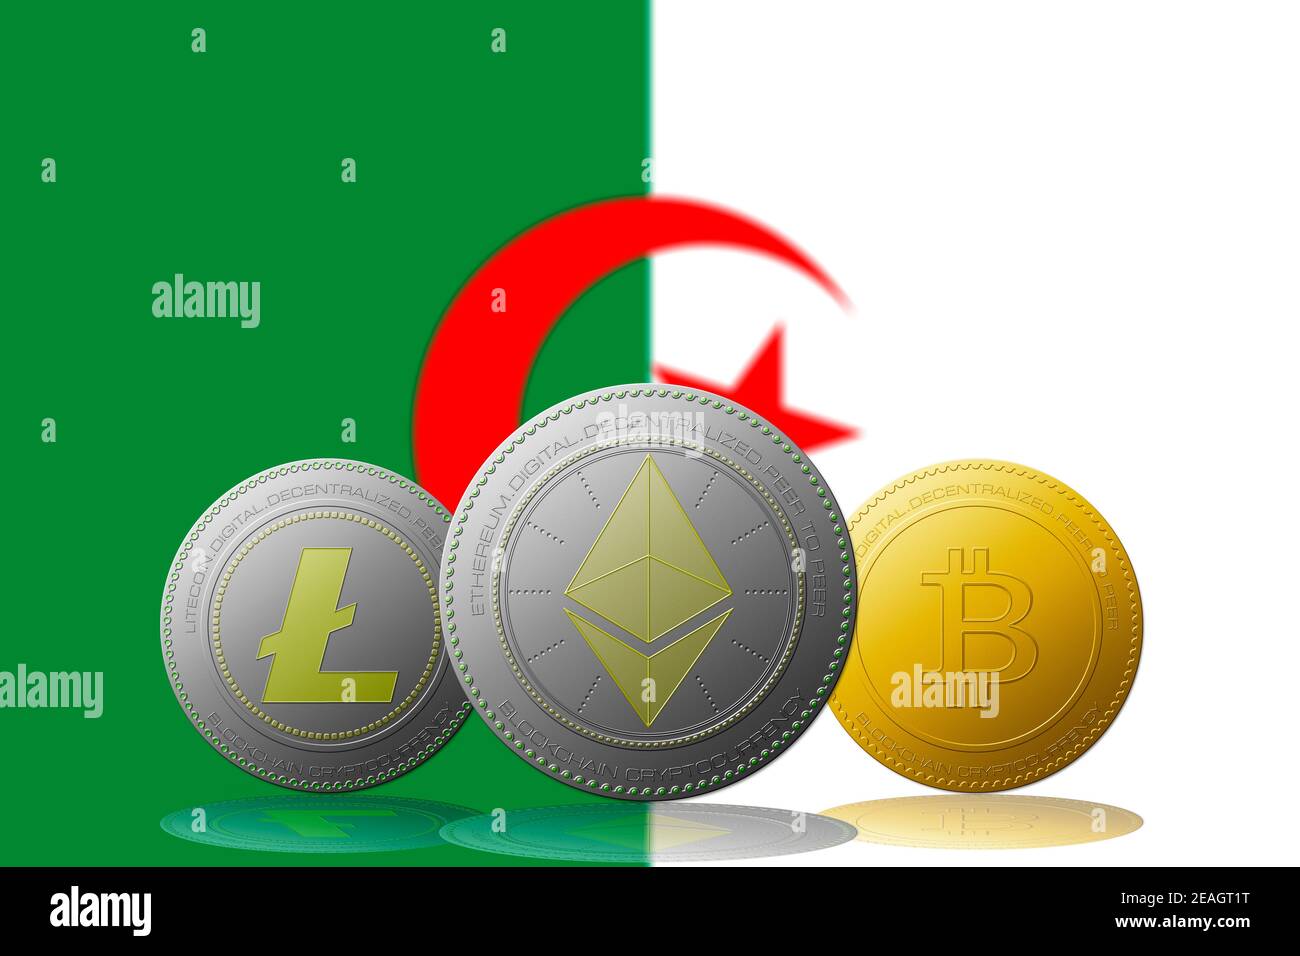 3D illustration Three cryptocurrencies Bitcoin  Ethereum and Litecoin with ALGERIA flag on background. Stock Photo